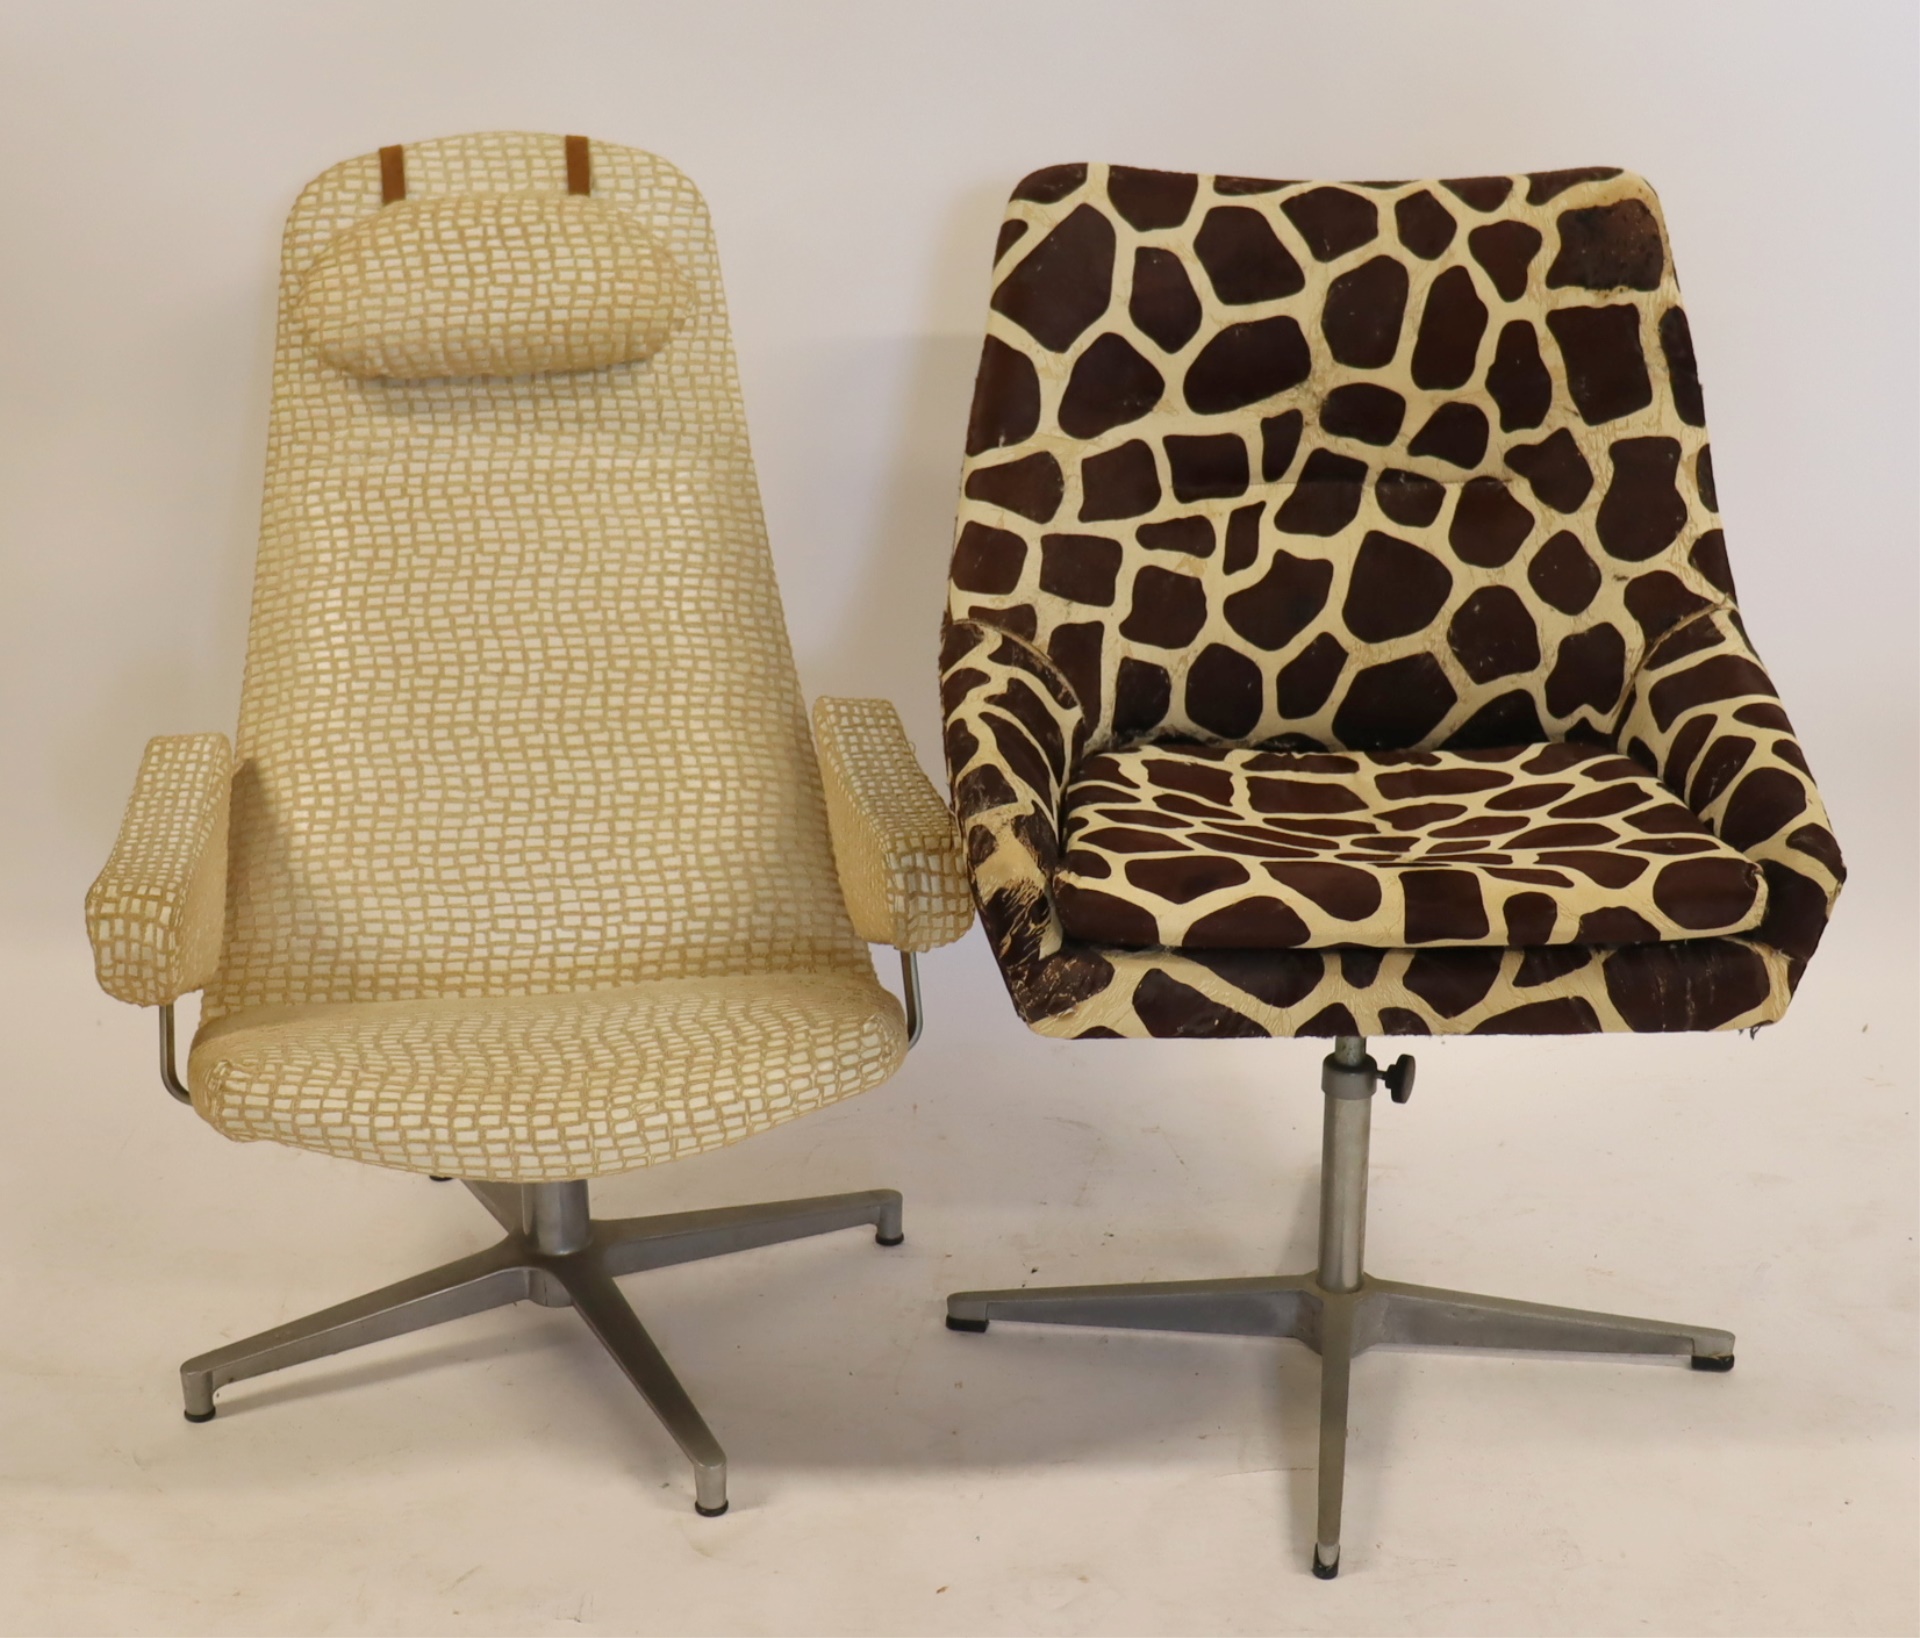 2 MIDCENTURY SWIVEL CHAIRS. 1 with